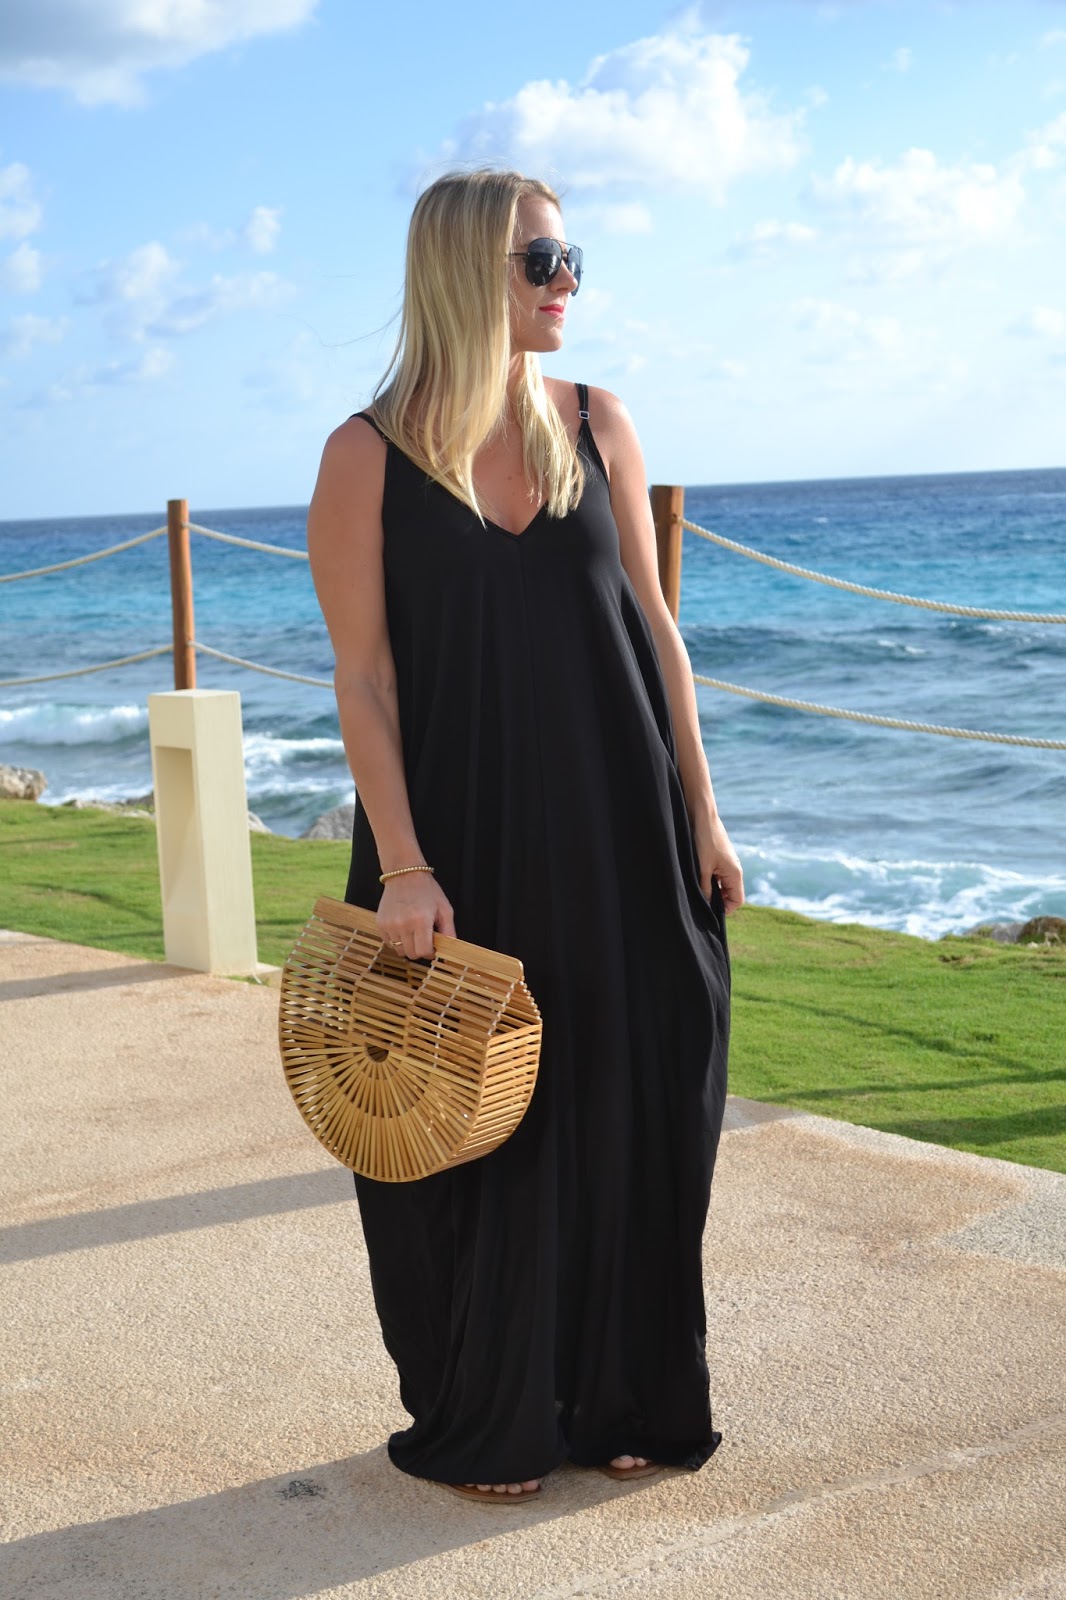 The Fashionably Late Blonde: Mexico Maxi Dress